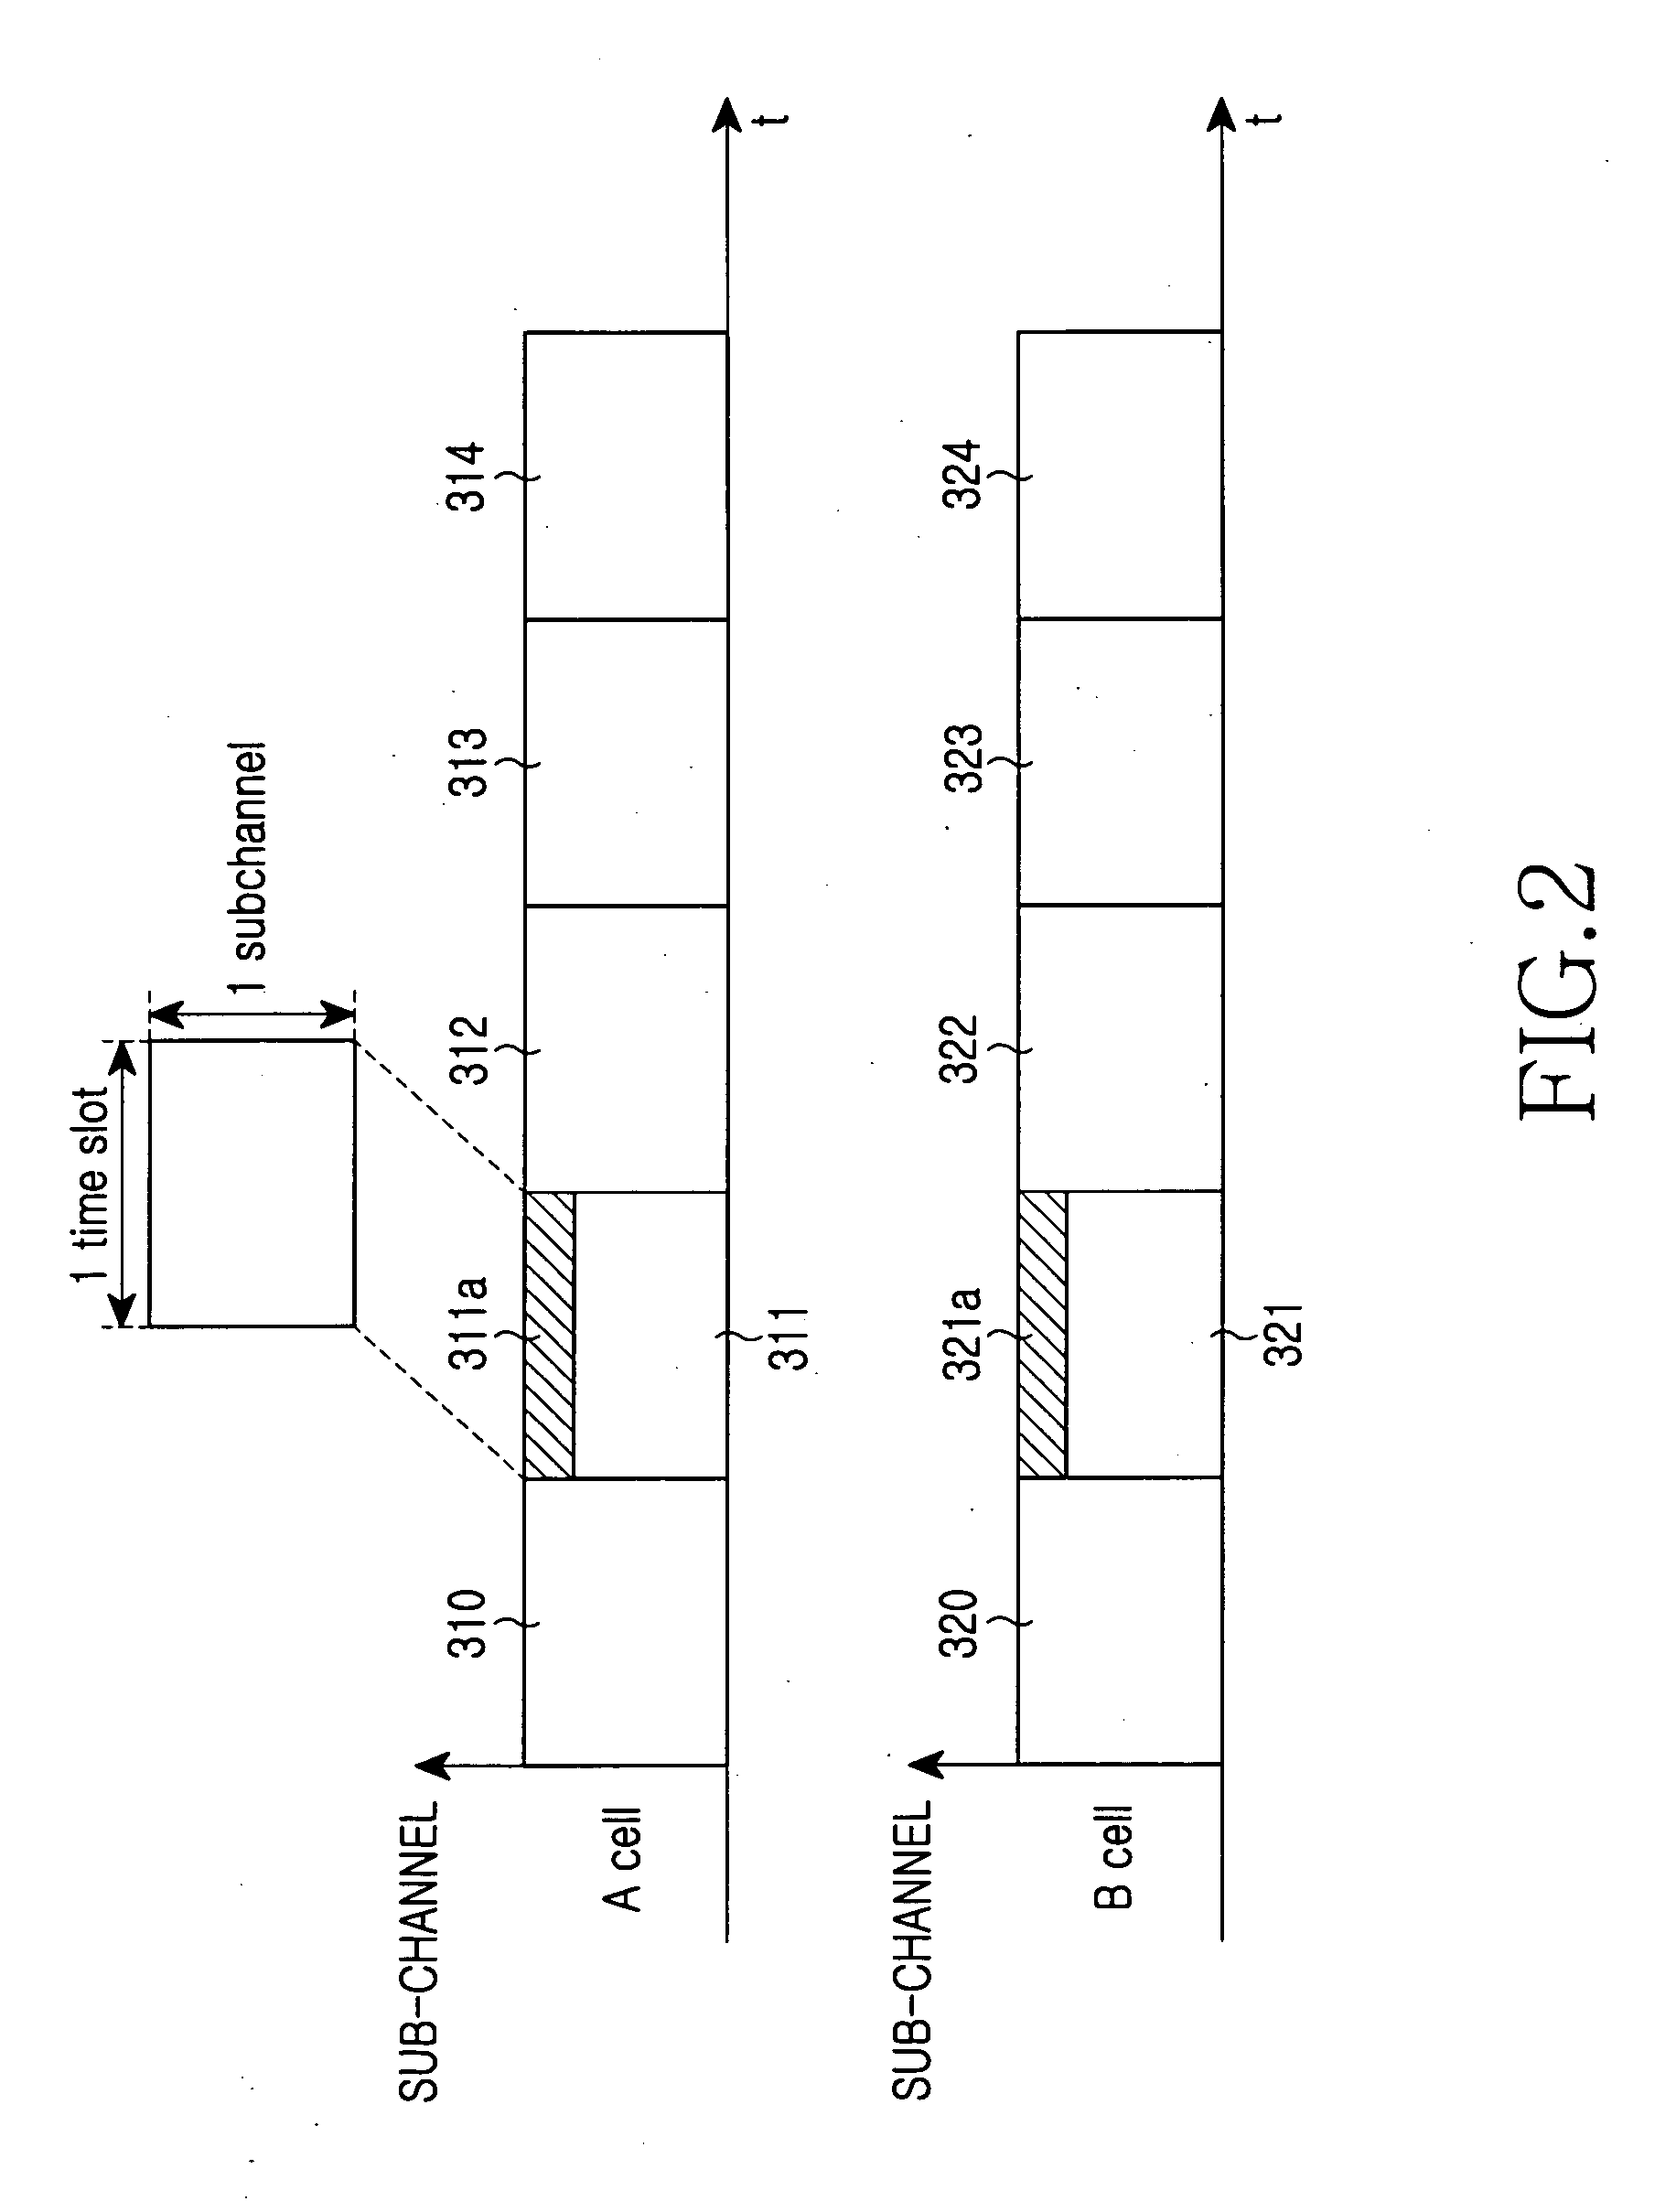 System and method for supporting soft handover in broadband wireless access communication system